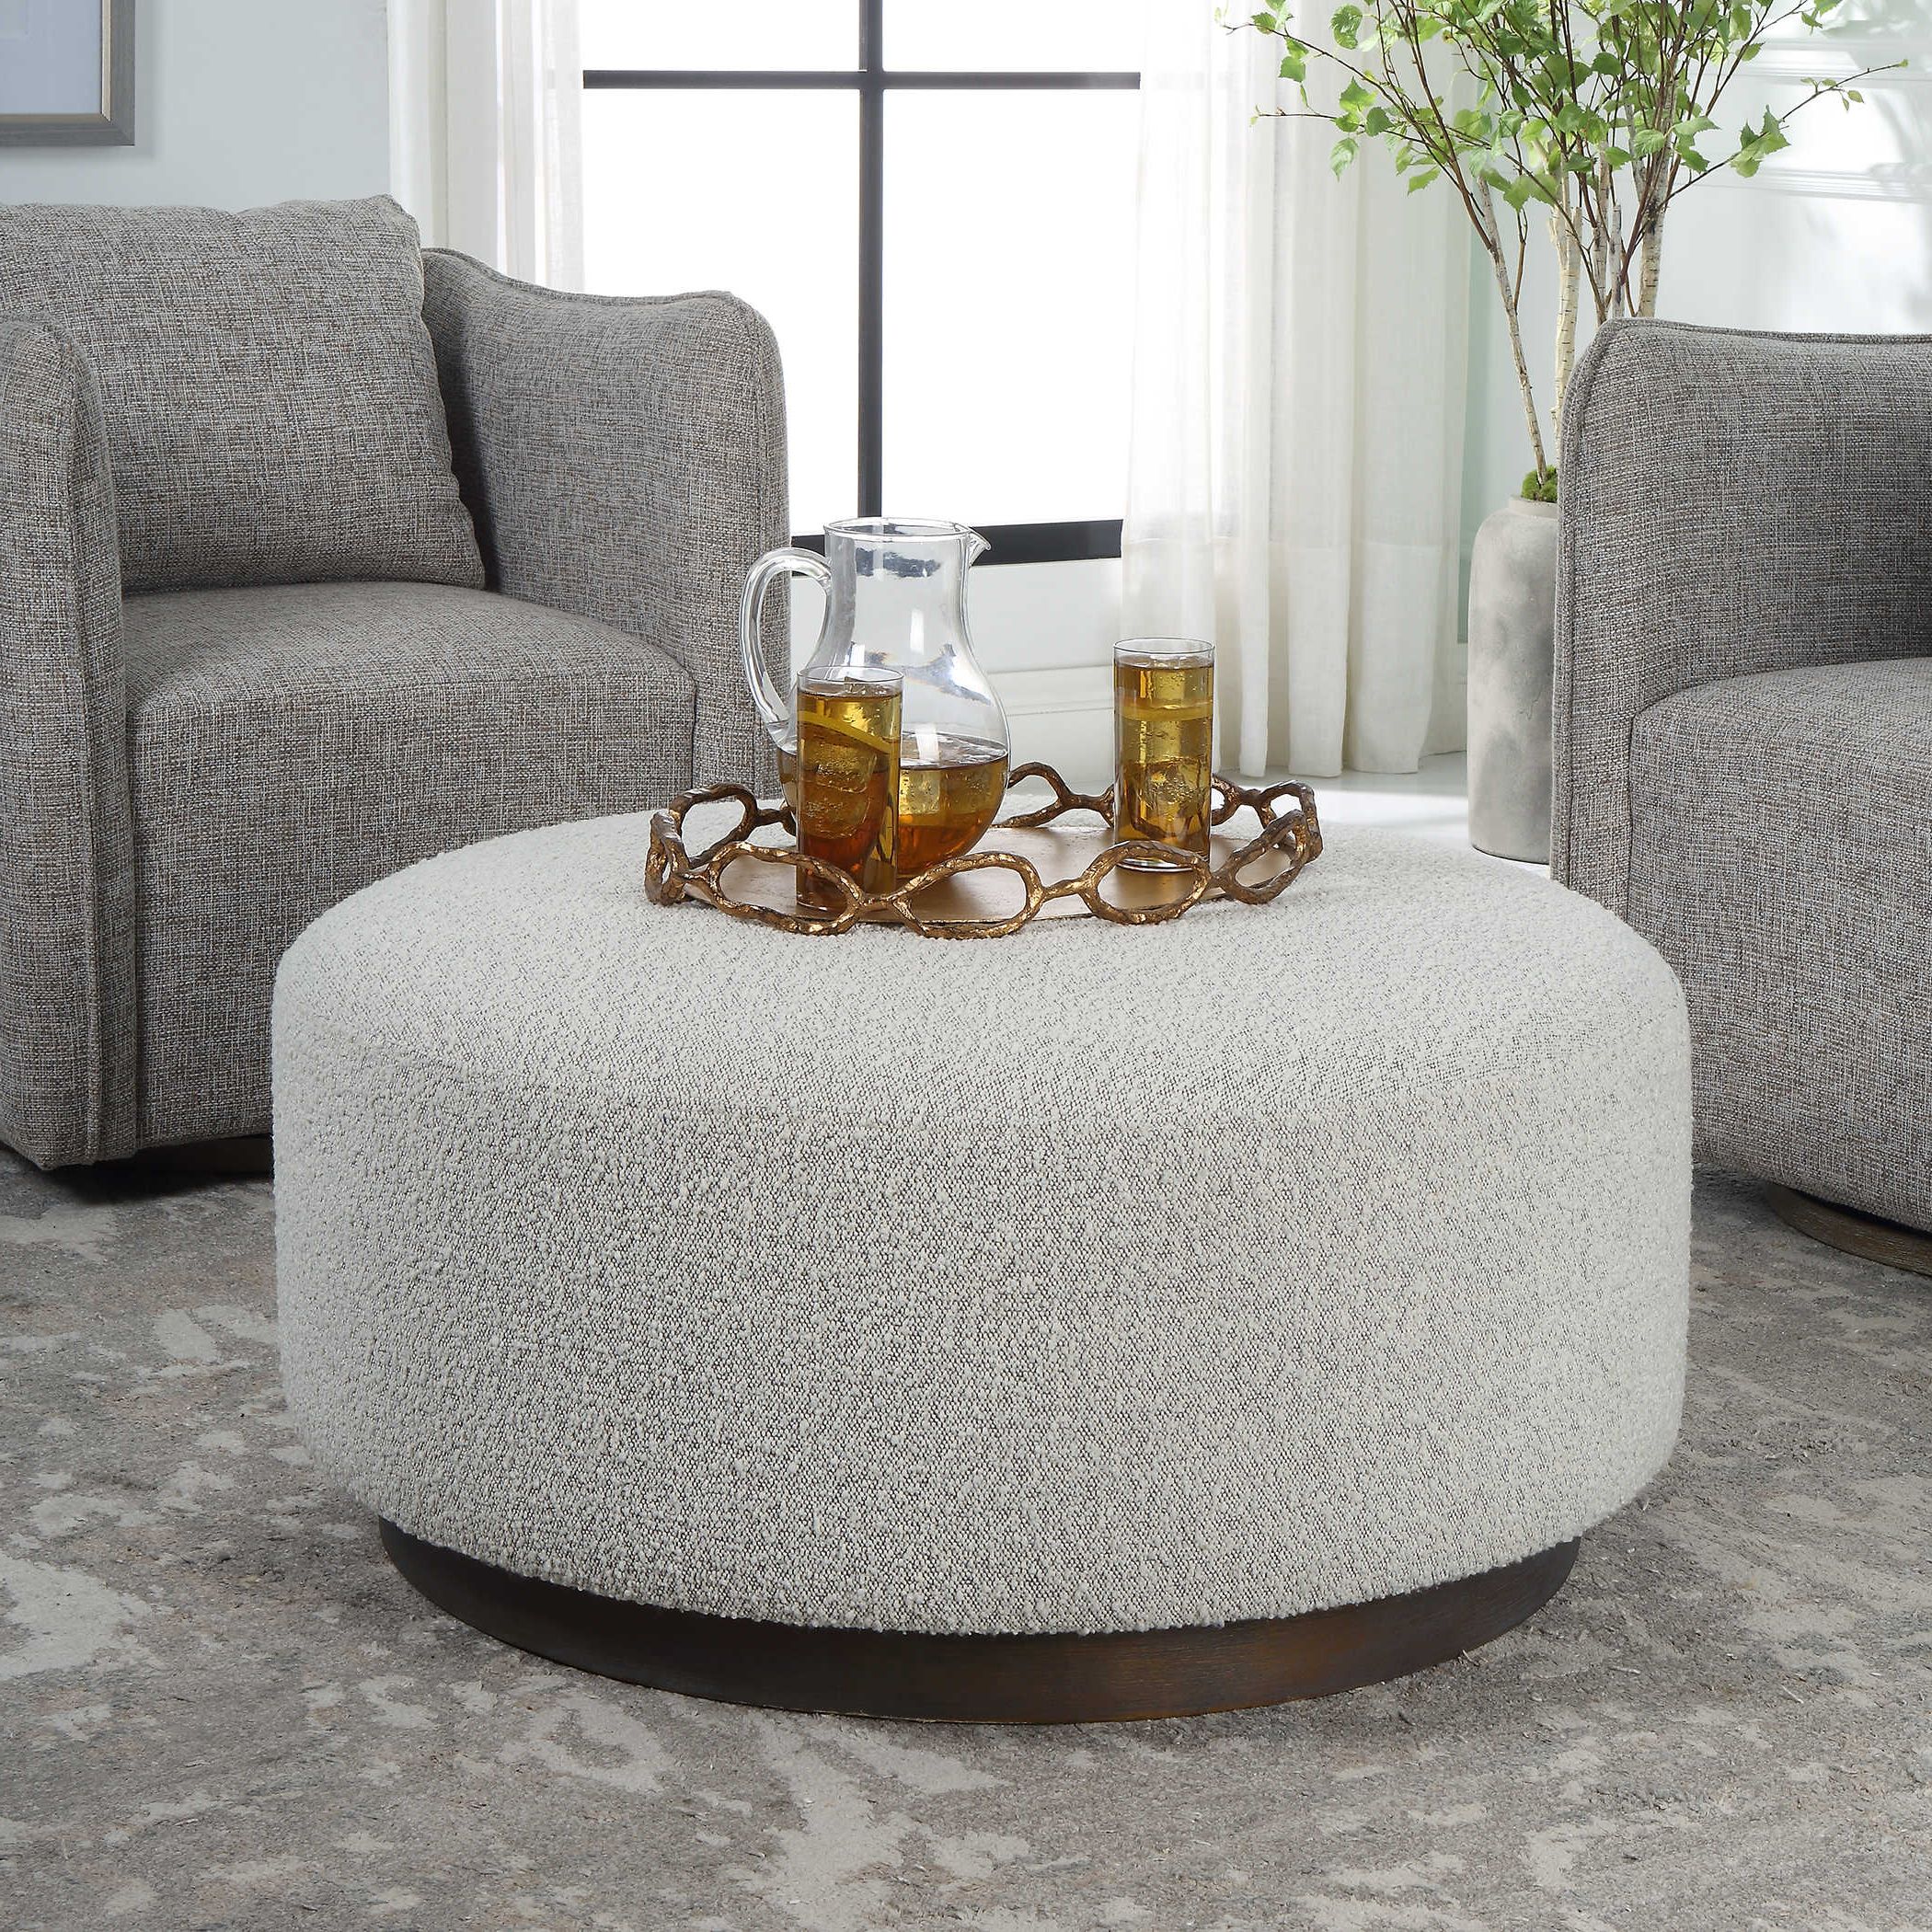 Uttermost Within Geometric Gray Ottomans (View 12 of 15)